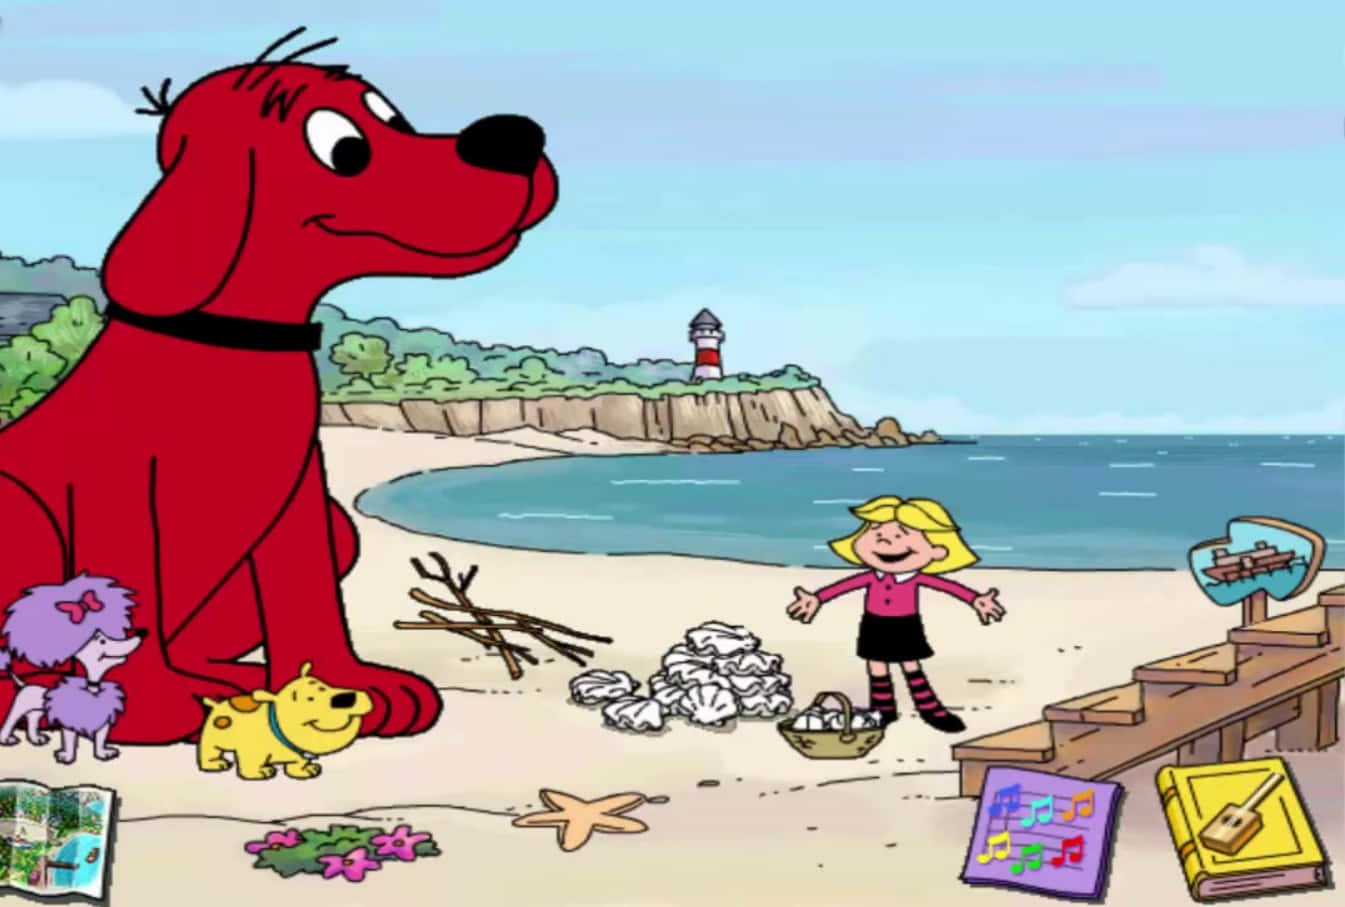 A Cartoon Dog With A Girl And Some Toys On The Beach